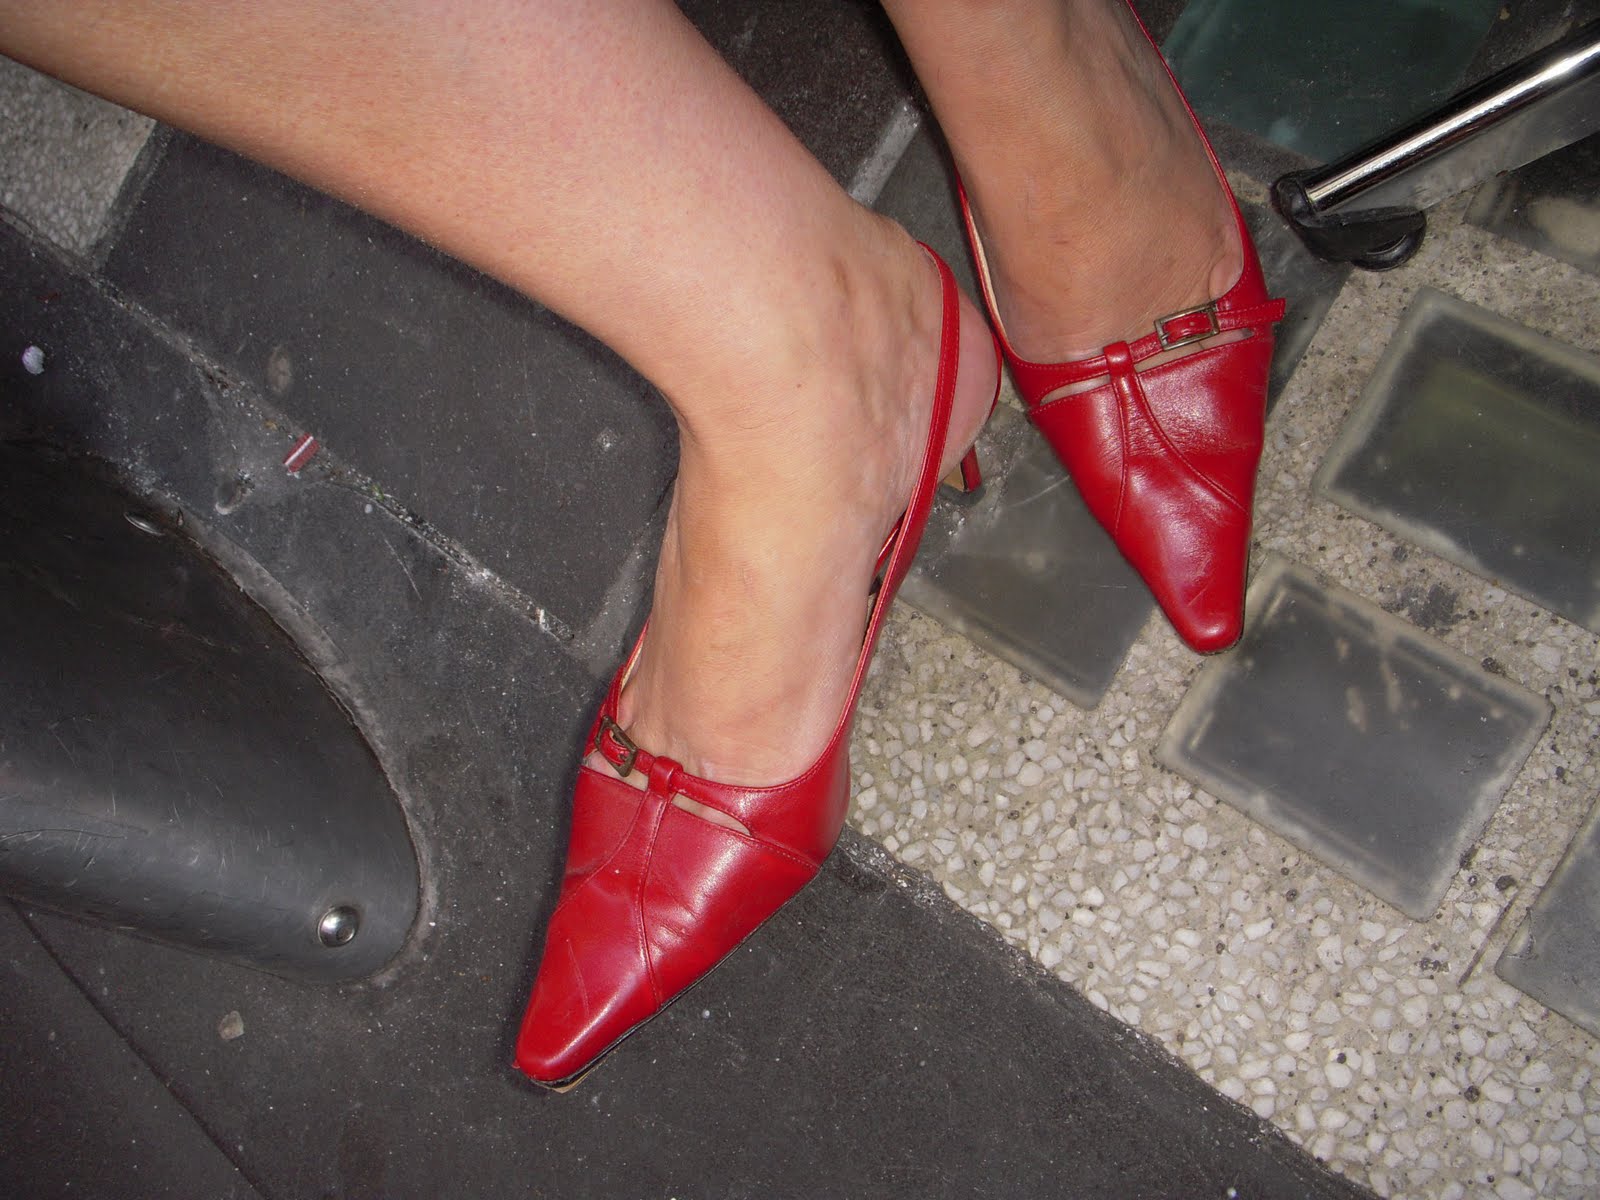 My Year in Shoes: February 2011